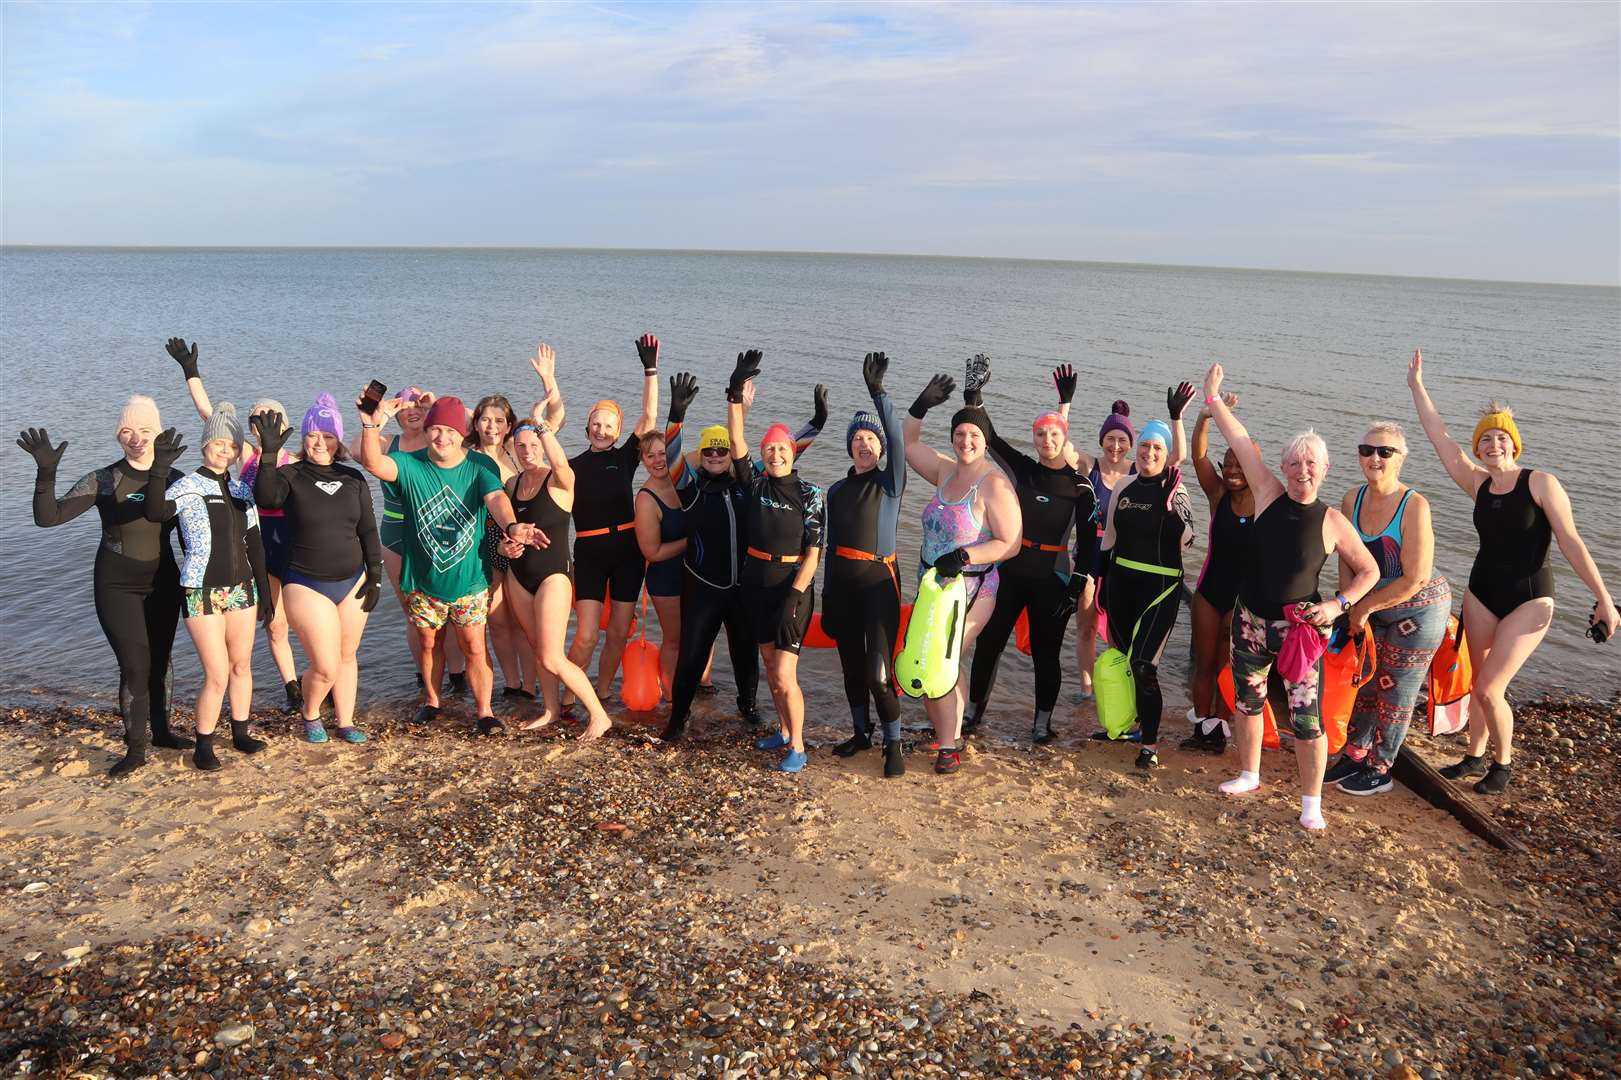 The Sheppey Bluetits 'wild' swimming club made a splash on new year's day by taking the plunge in the sea at The Leas, Minster. Picture: John Nurden